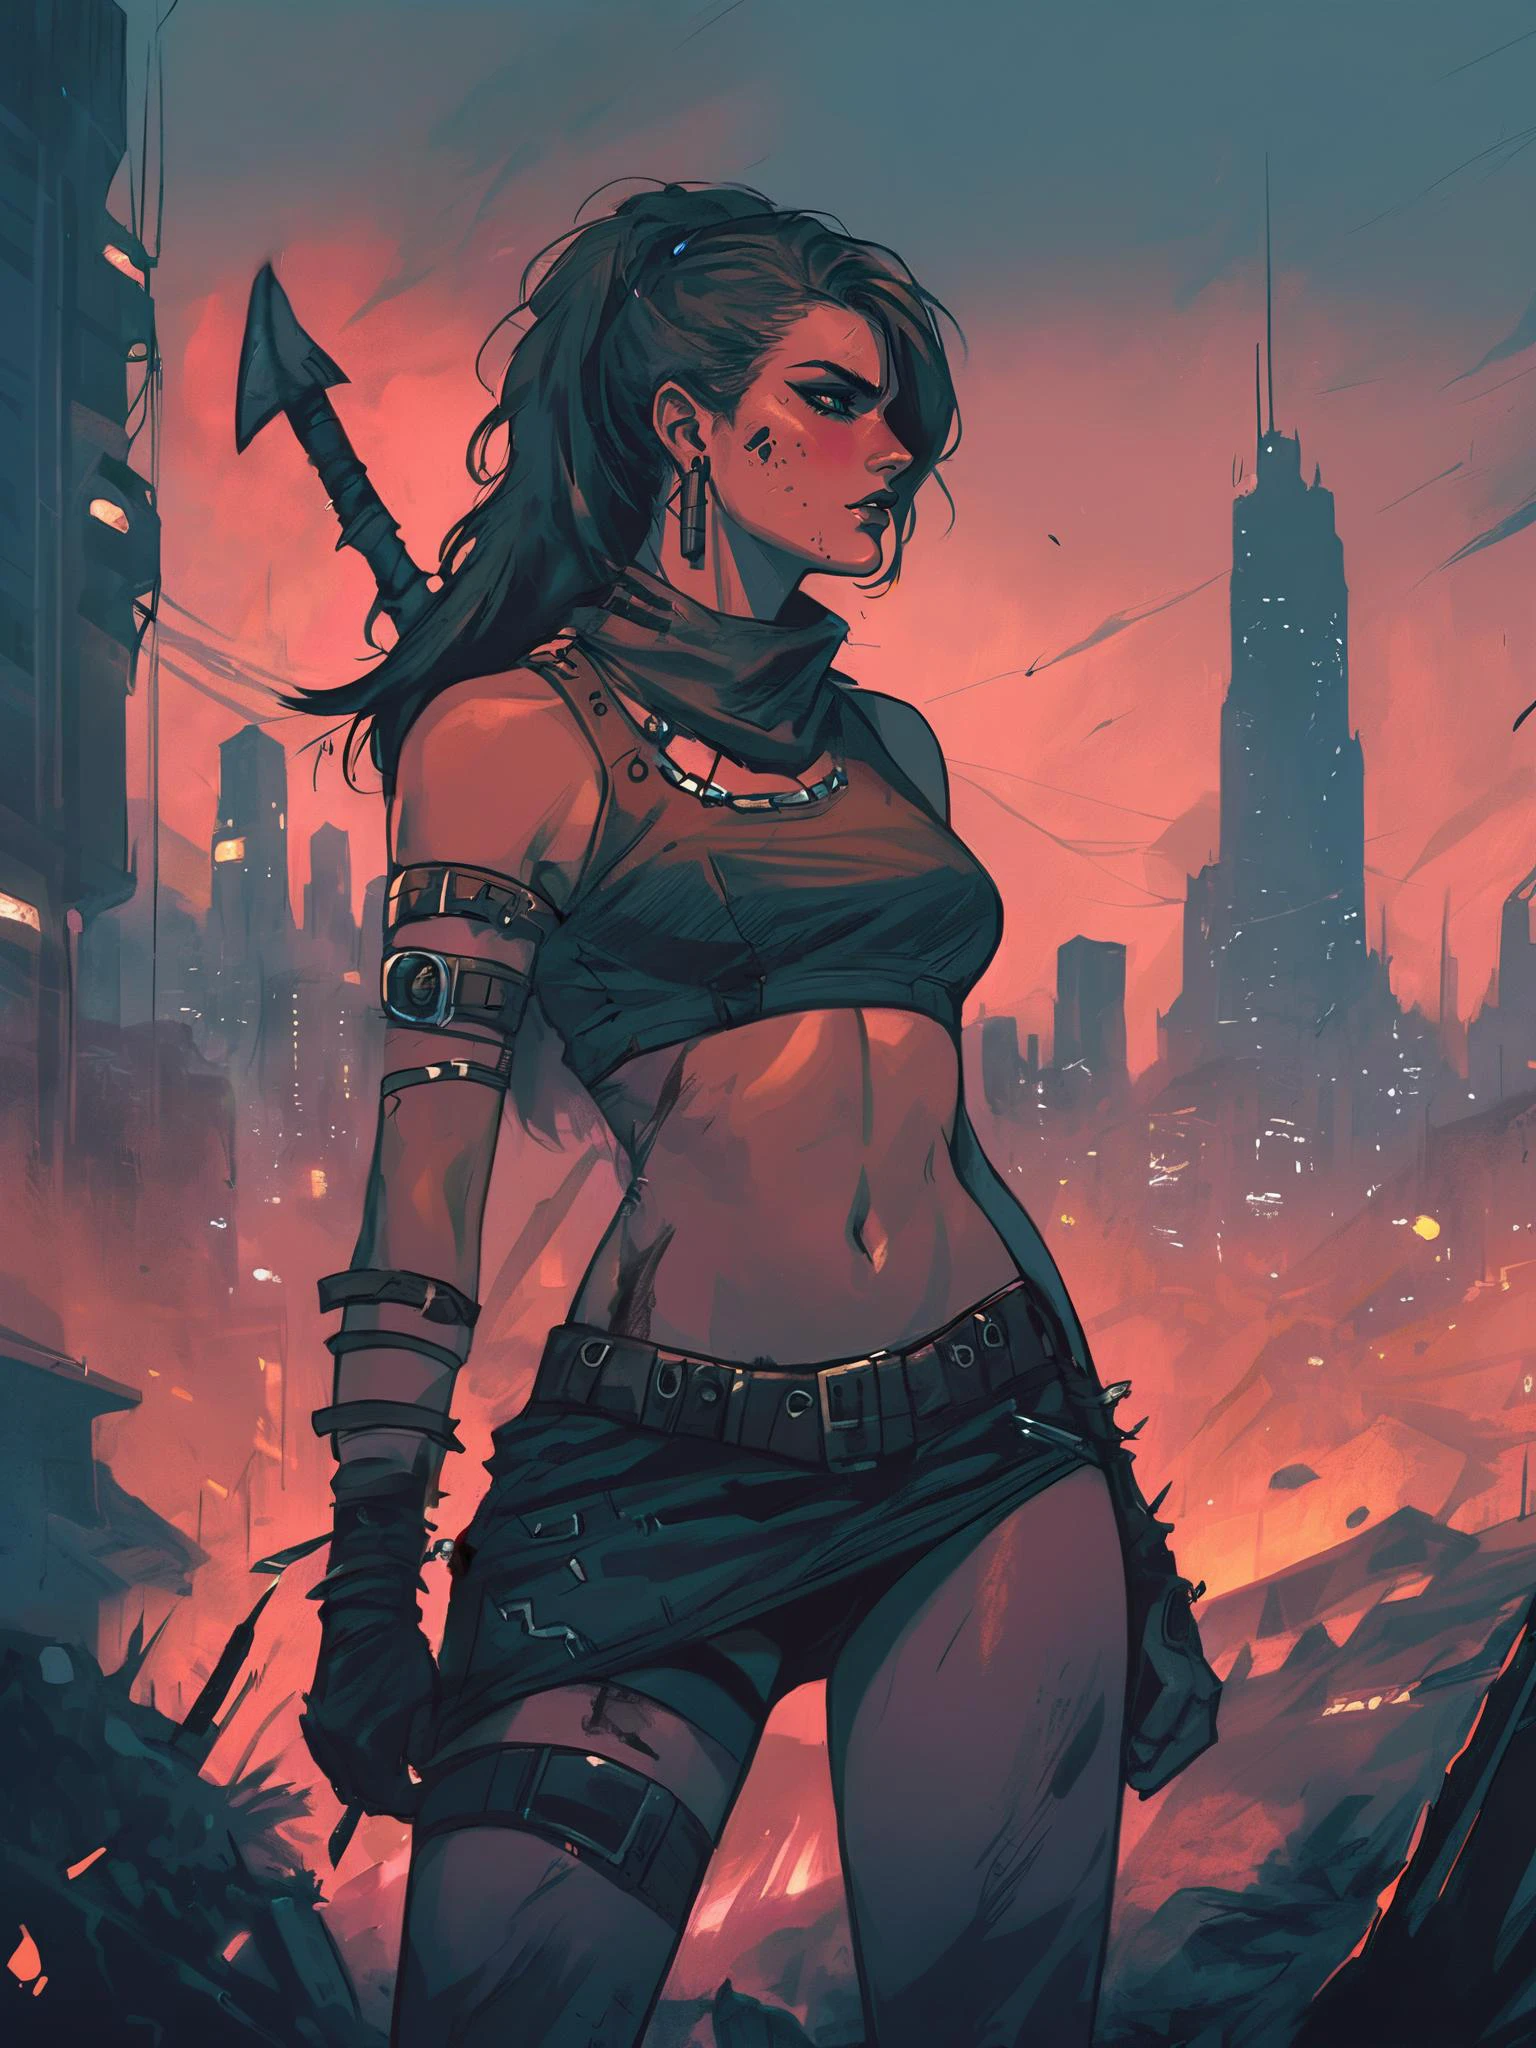 highest quality drawing, futuristic 80s style city in background and close up beautiful fantasy barbarian woman, post apocalyptic style, grim atmosphere, textured